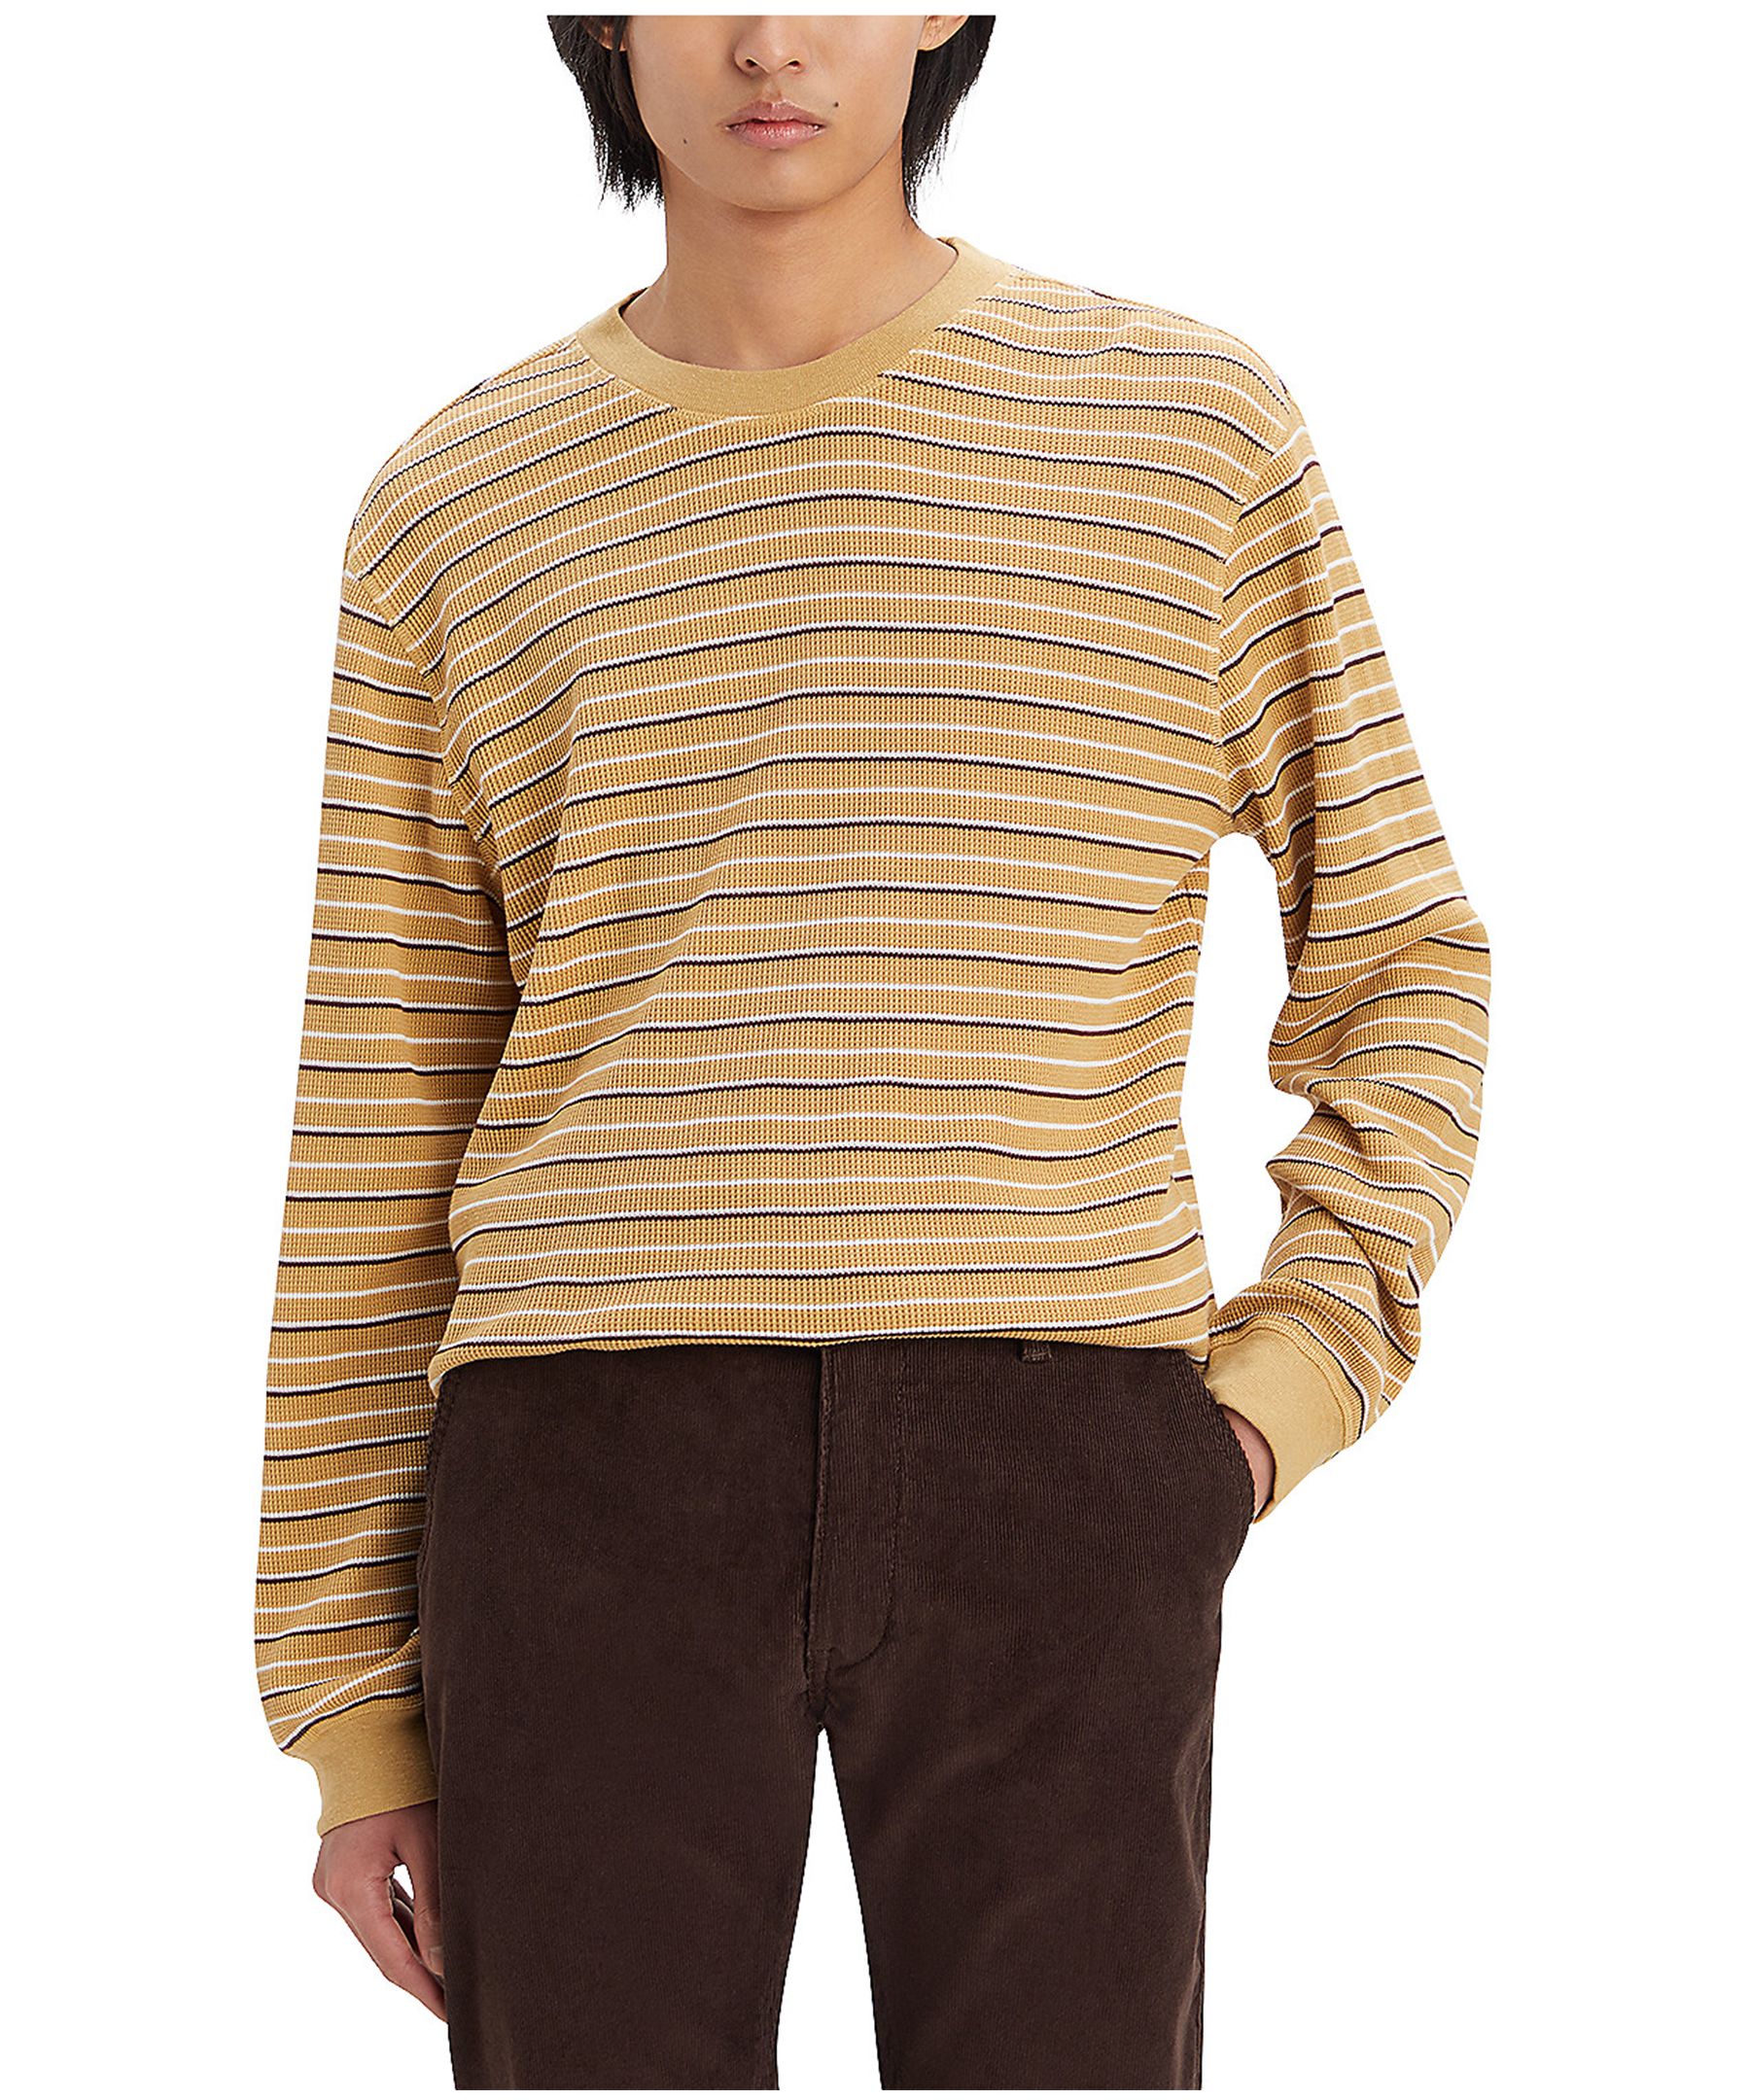 Levi's Men's Long Sleeve Striped Thermal Knit Top | Marks